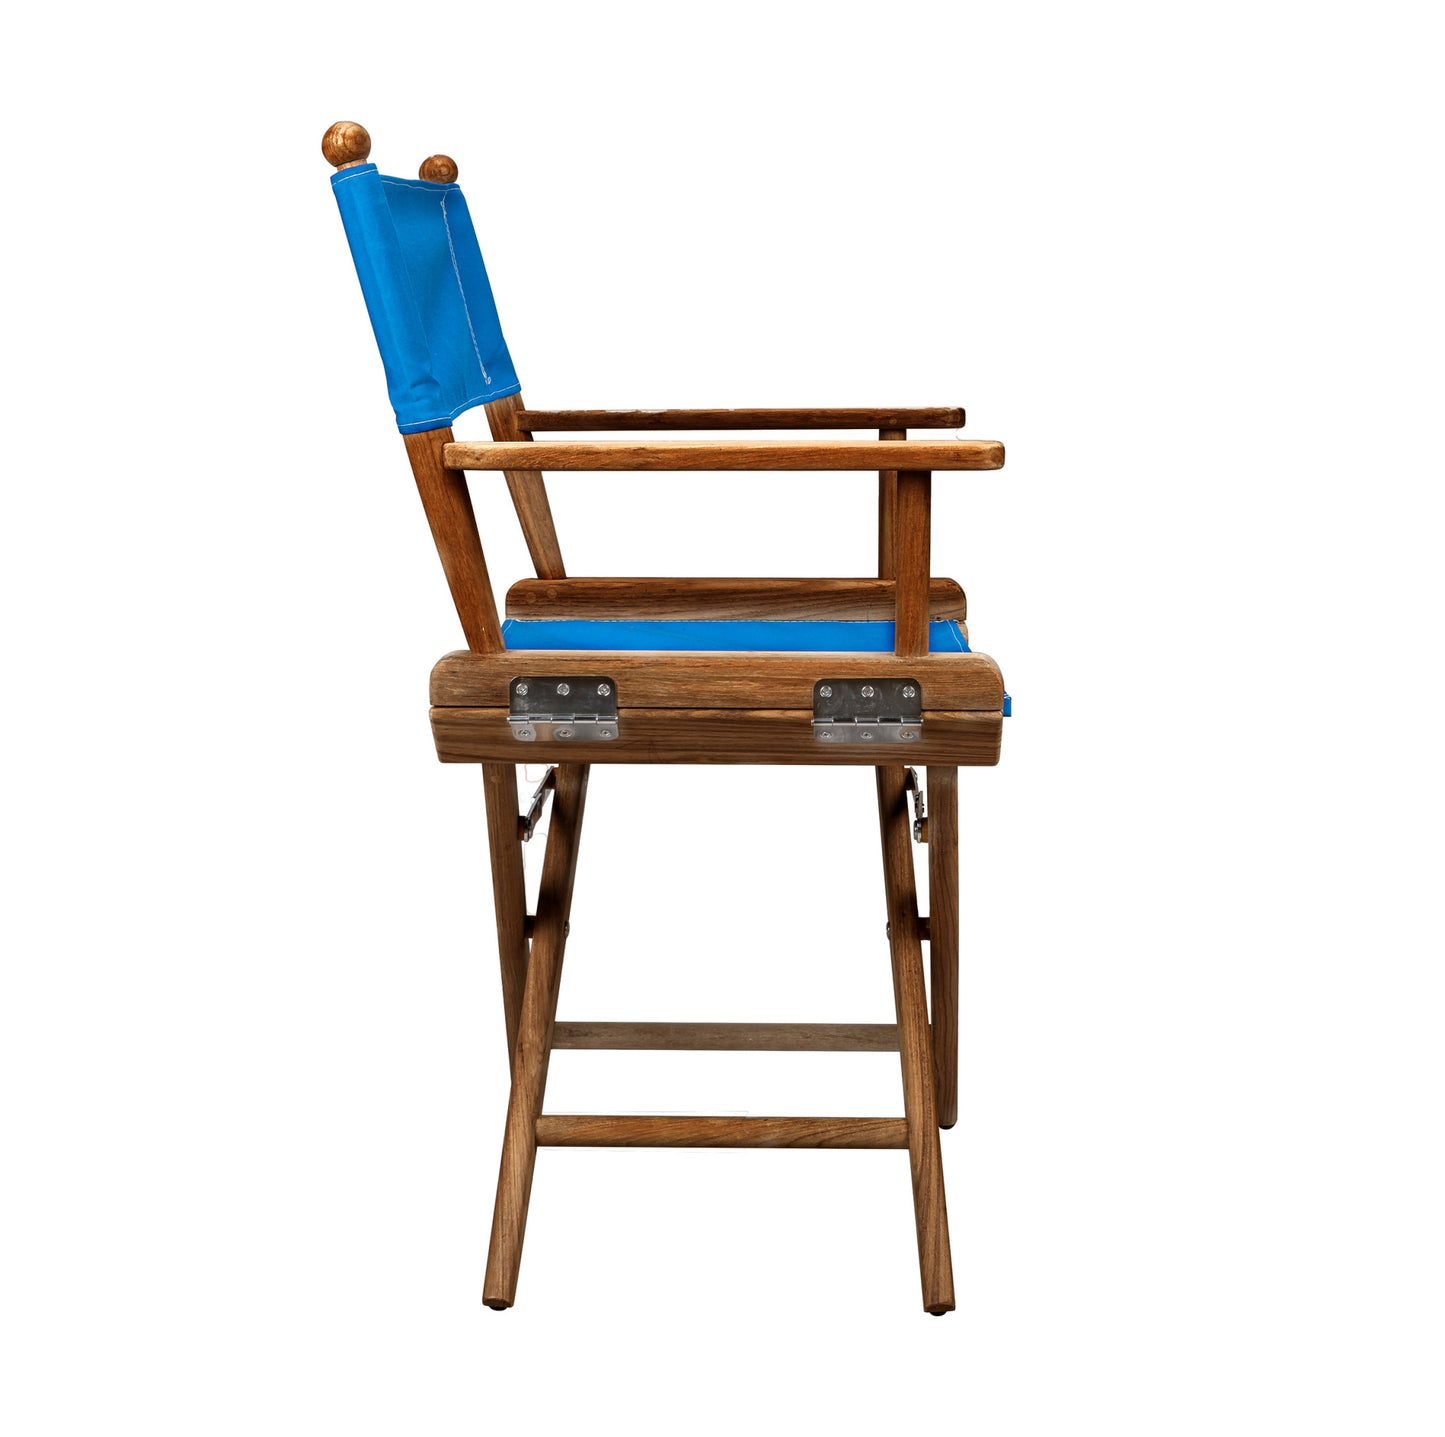 23" Blue and Natural Wood Solid Wood Indoor Outdoor Director Chair